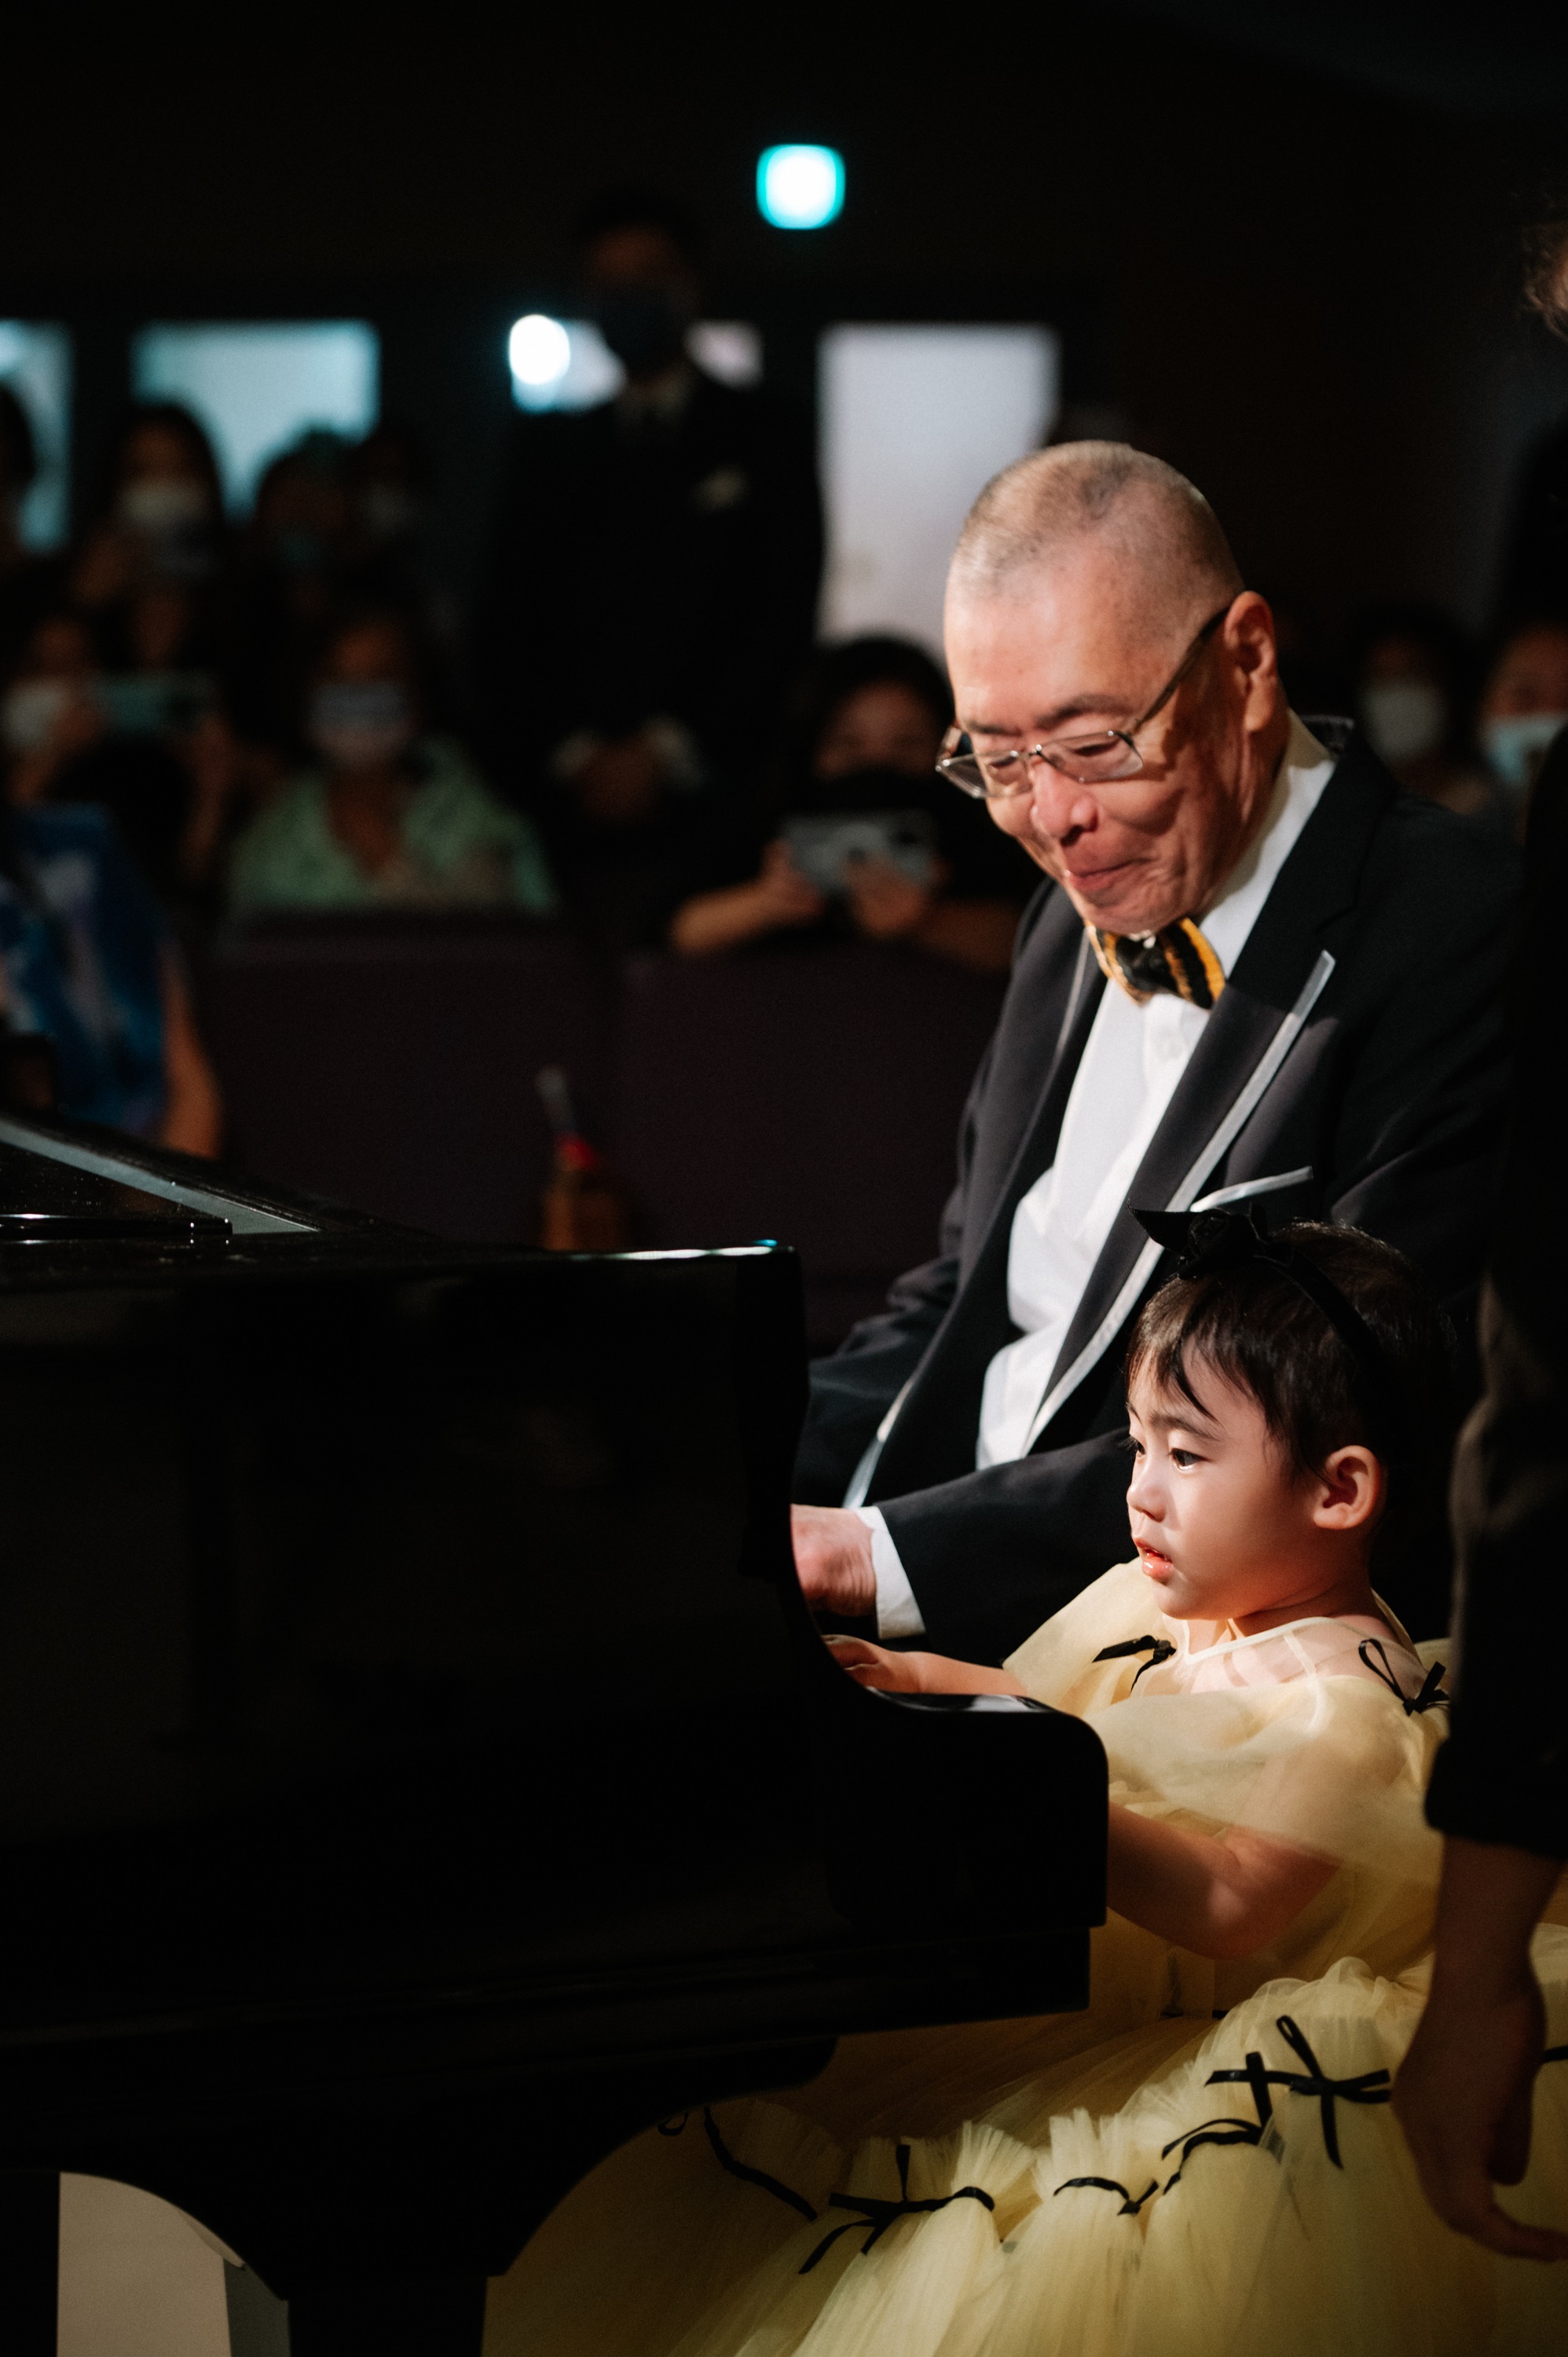 Mr. Liu Shikun and his daughter, Liu Beibei, appeared on stage together for the first time at the Anniversary Concert of the Pallas Piano Academy.